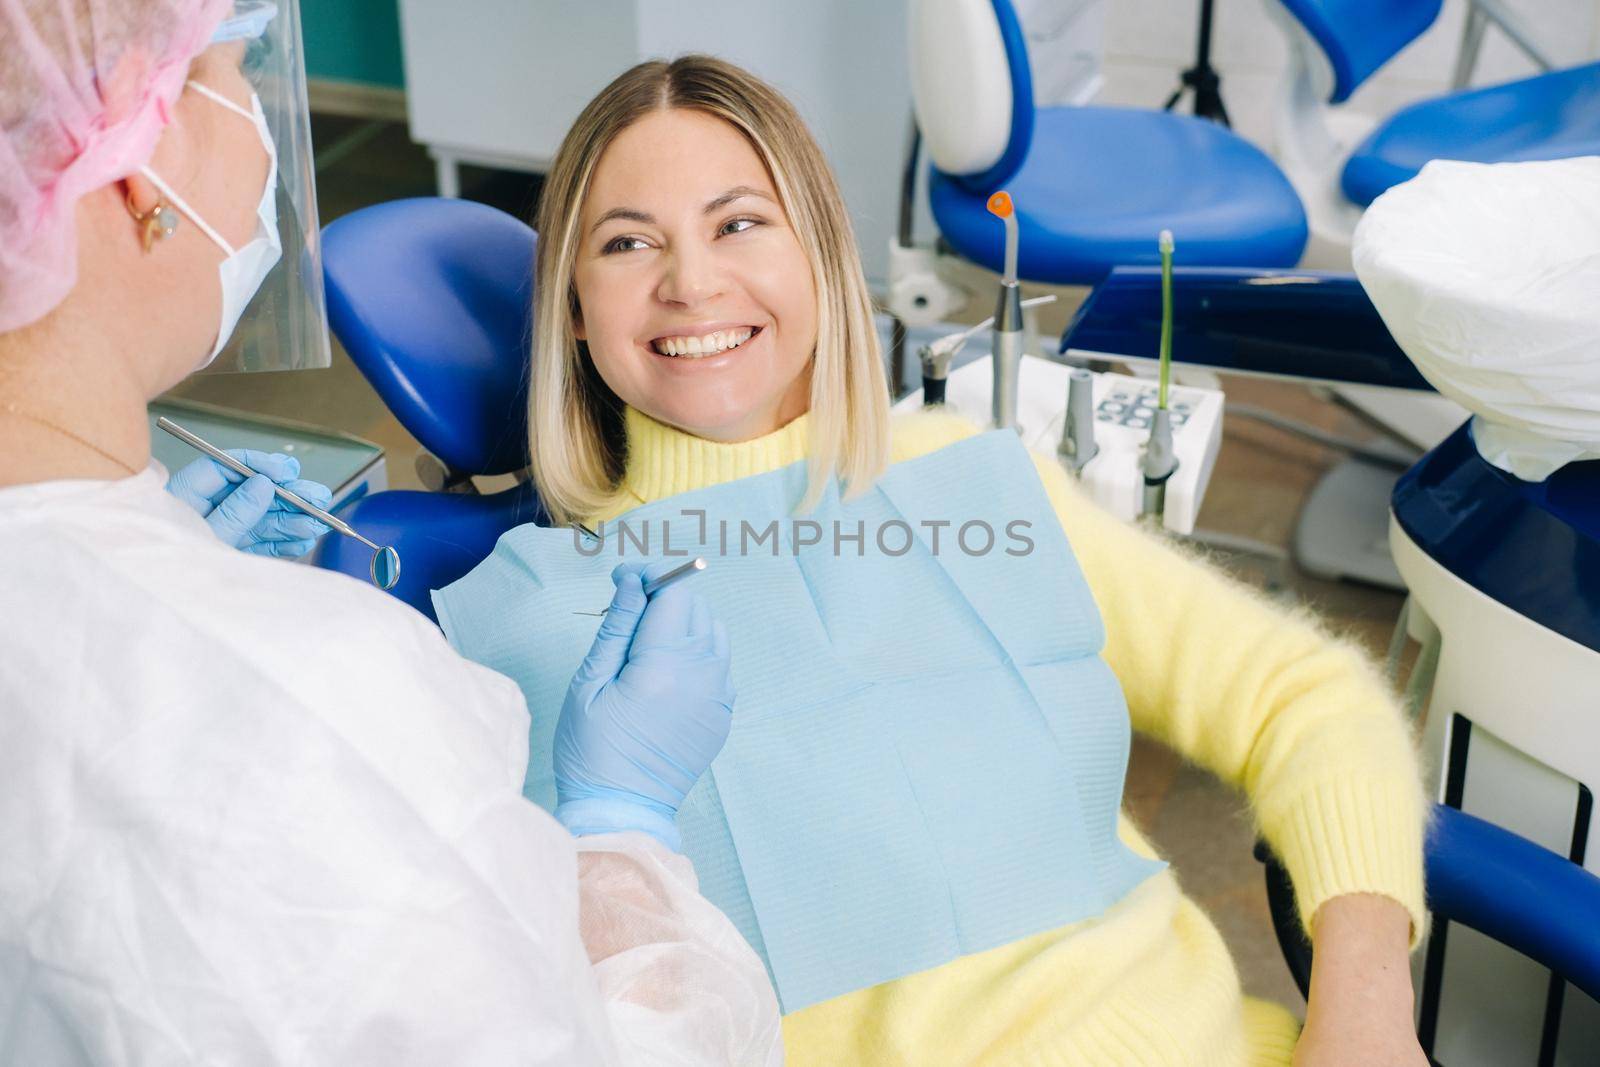 The girl smiles at the dentist and looks at her by Lobachad